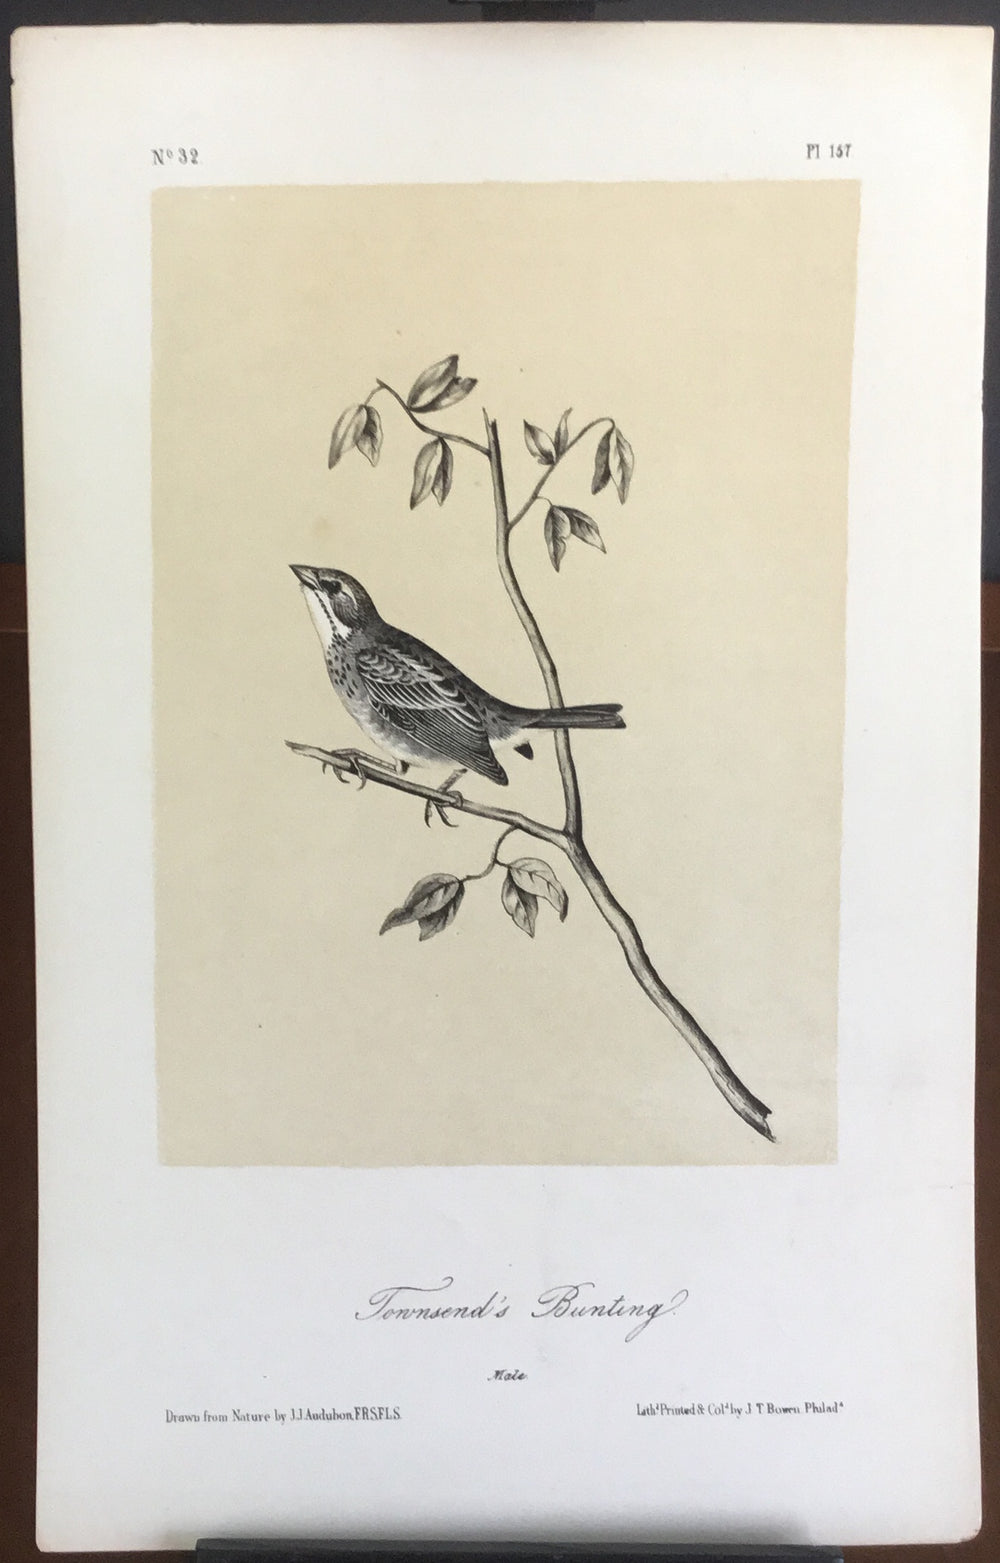 Audubon Octavo Townsend’s Bunting (2), plate 154, uncolored test sheet, 7 x 11